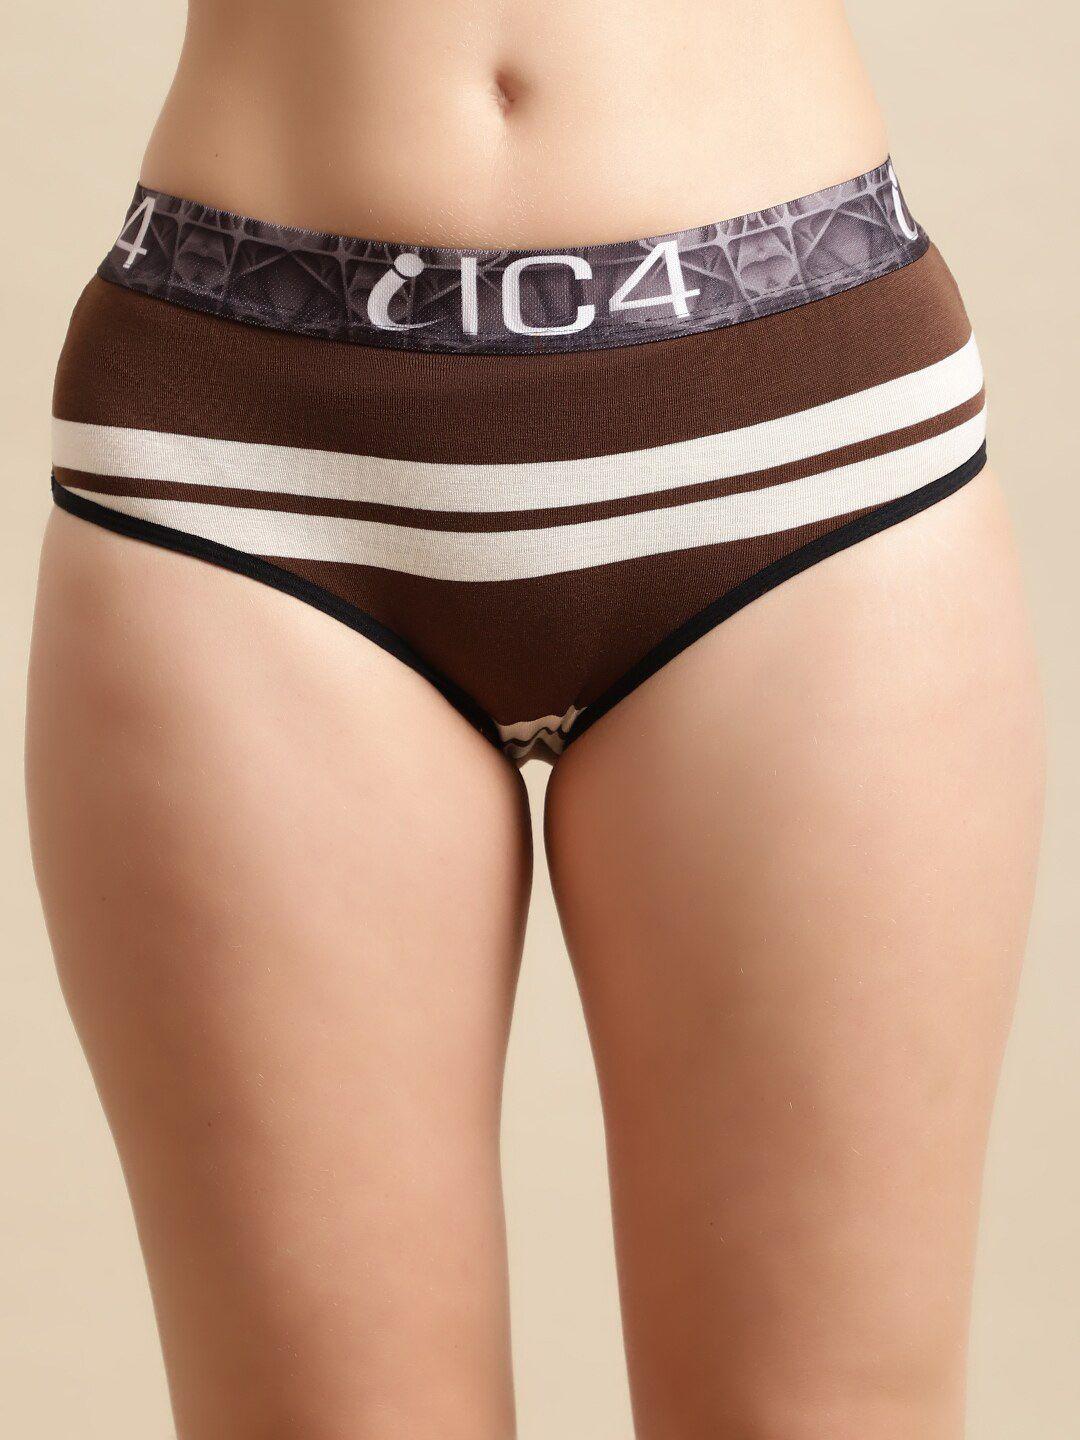 ic4 women striped hipster brief